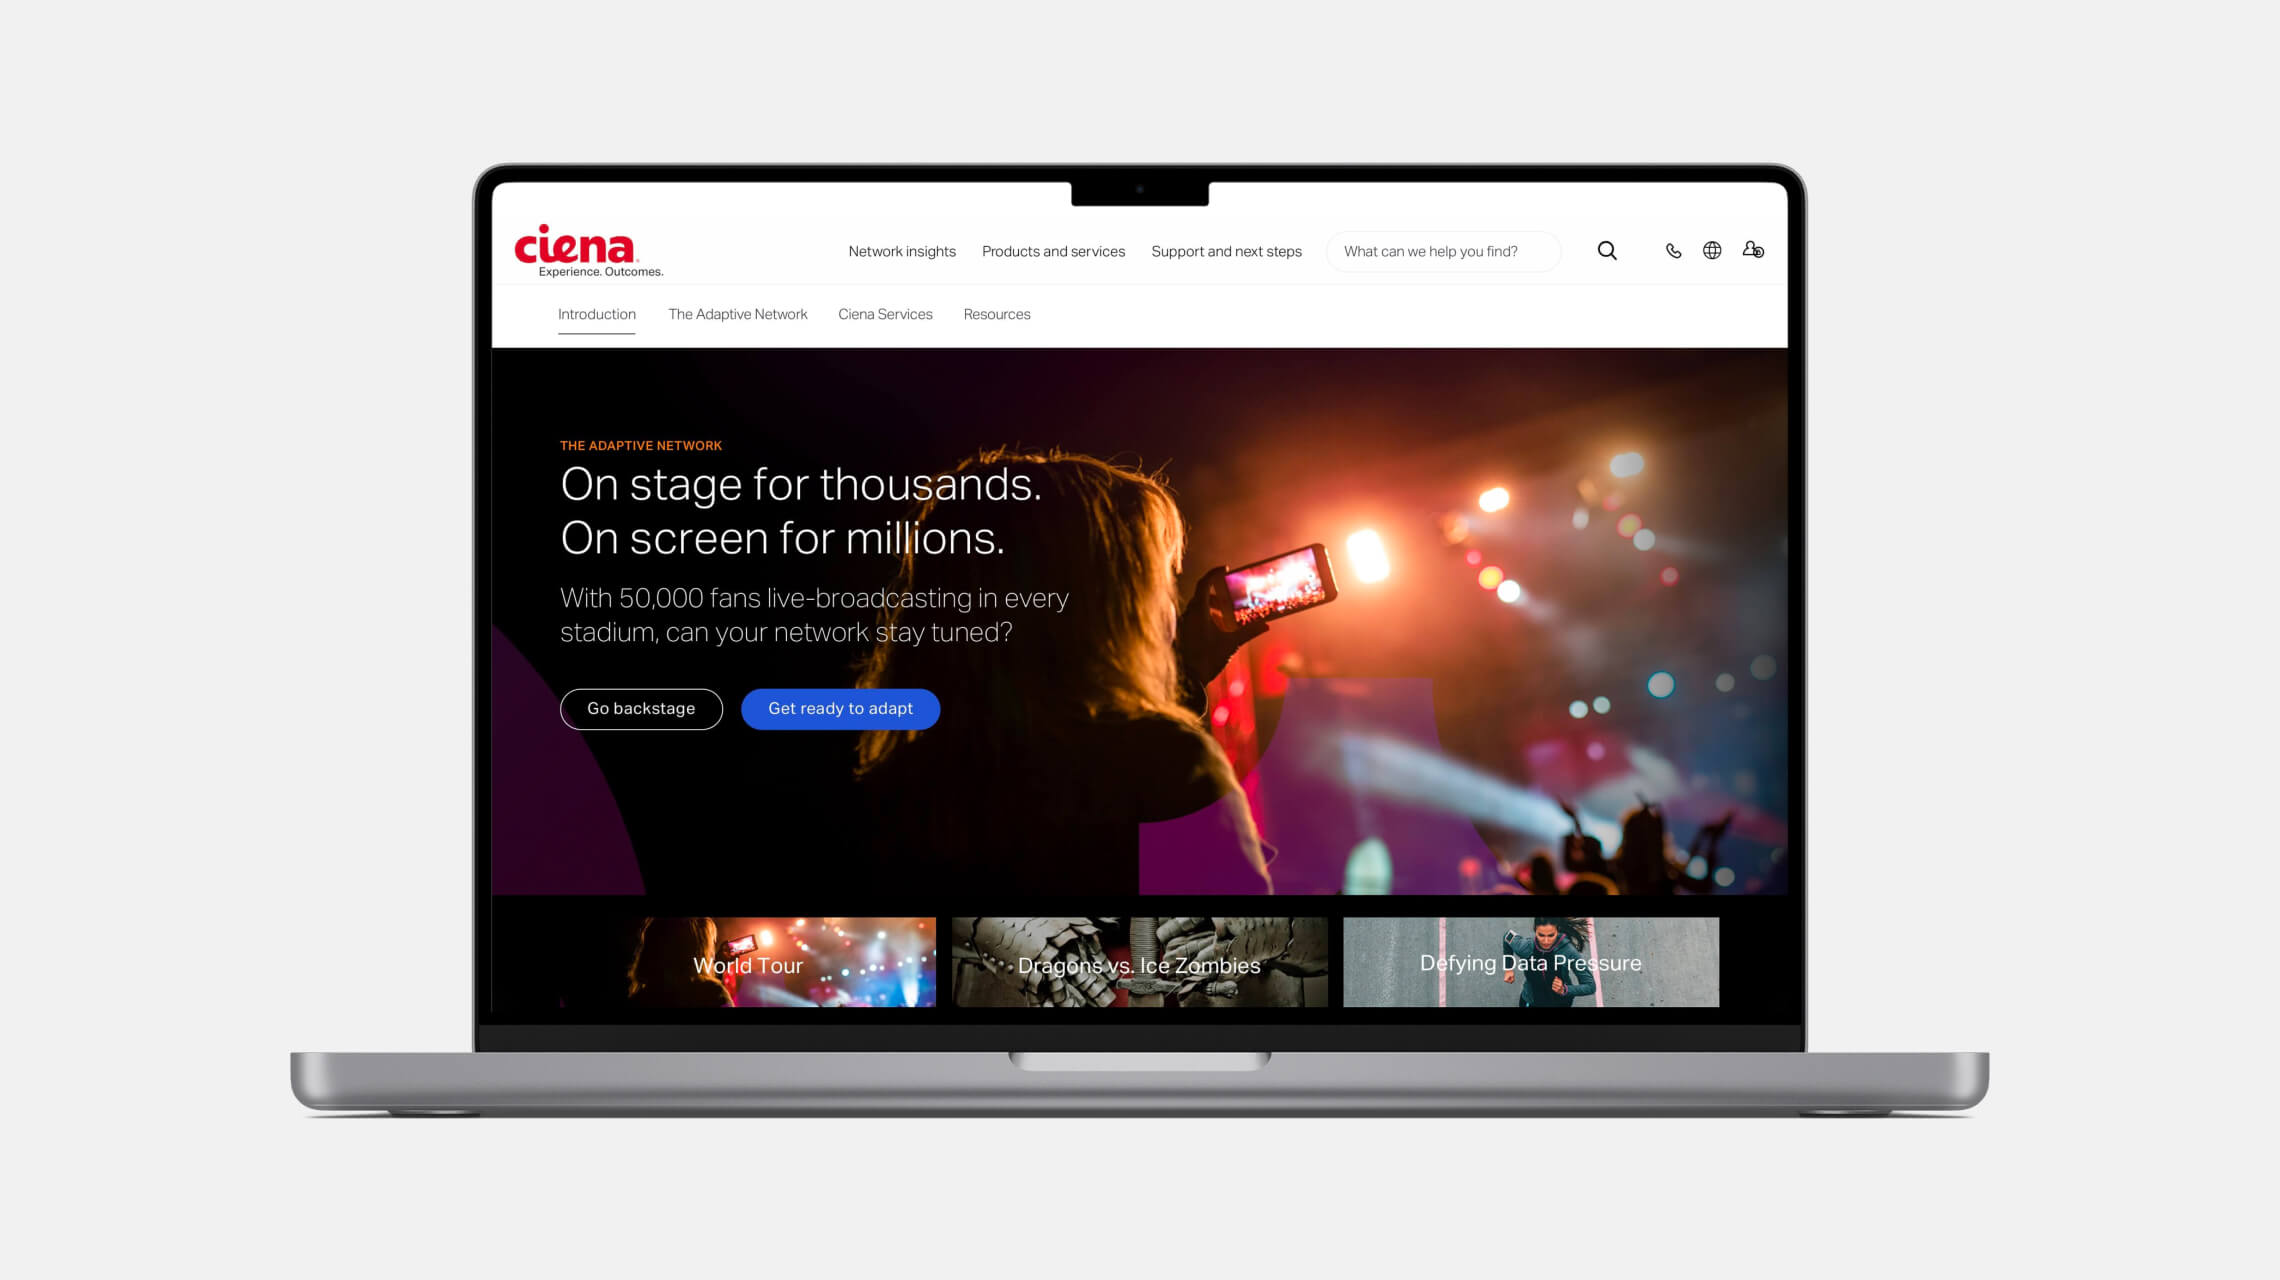 The Ciena Adaptive Network landing page displayed on a laptop